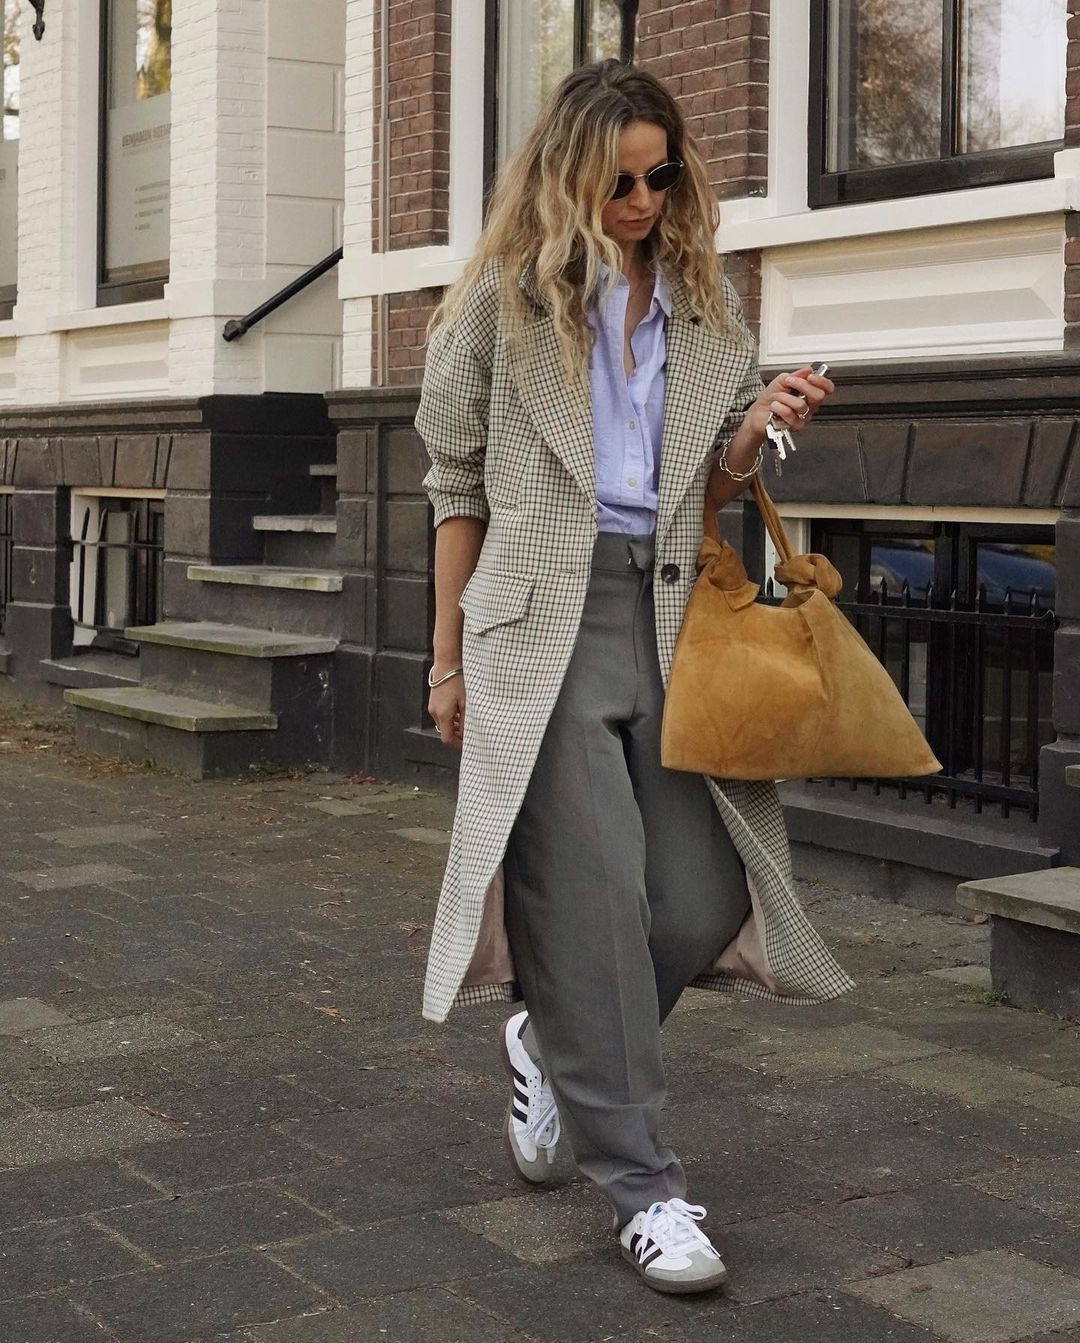 The 10 Best Shoes to Wear With Your WideLeg Pants